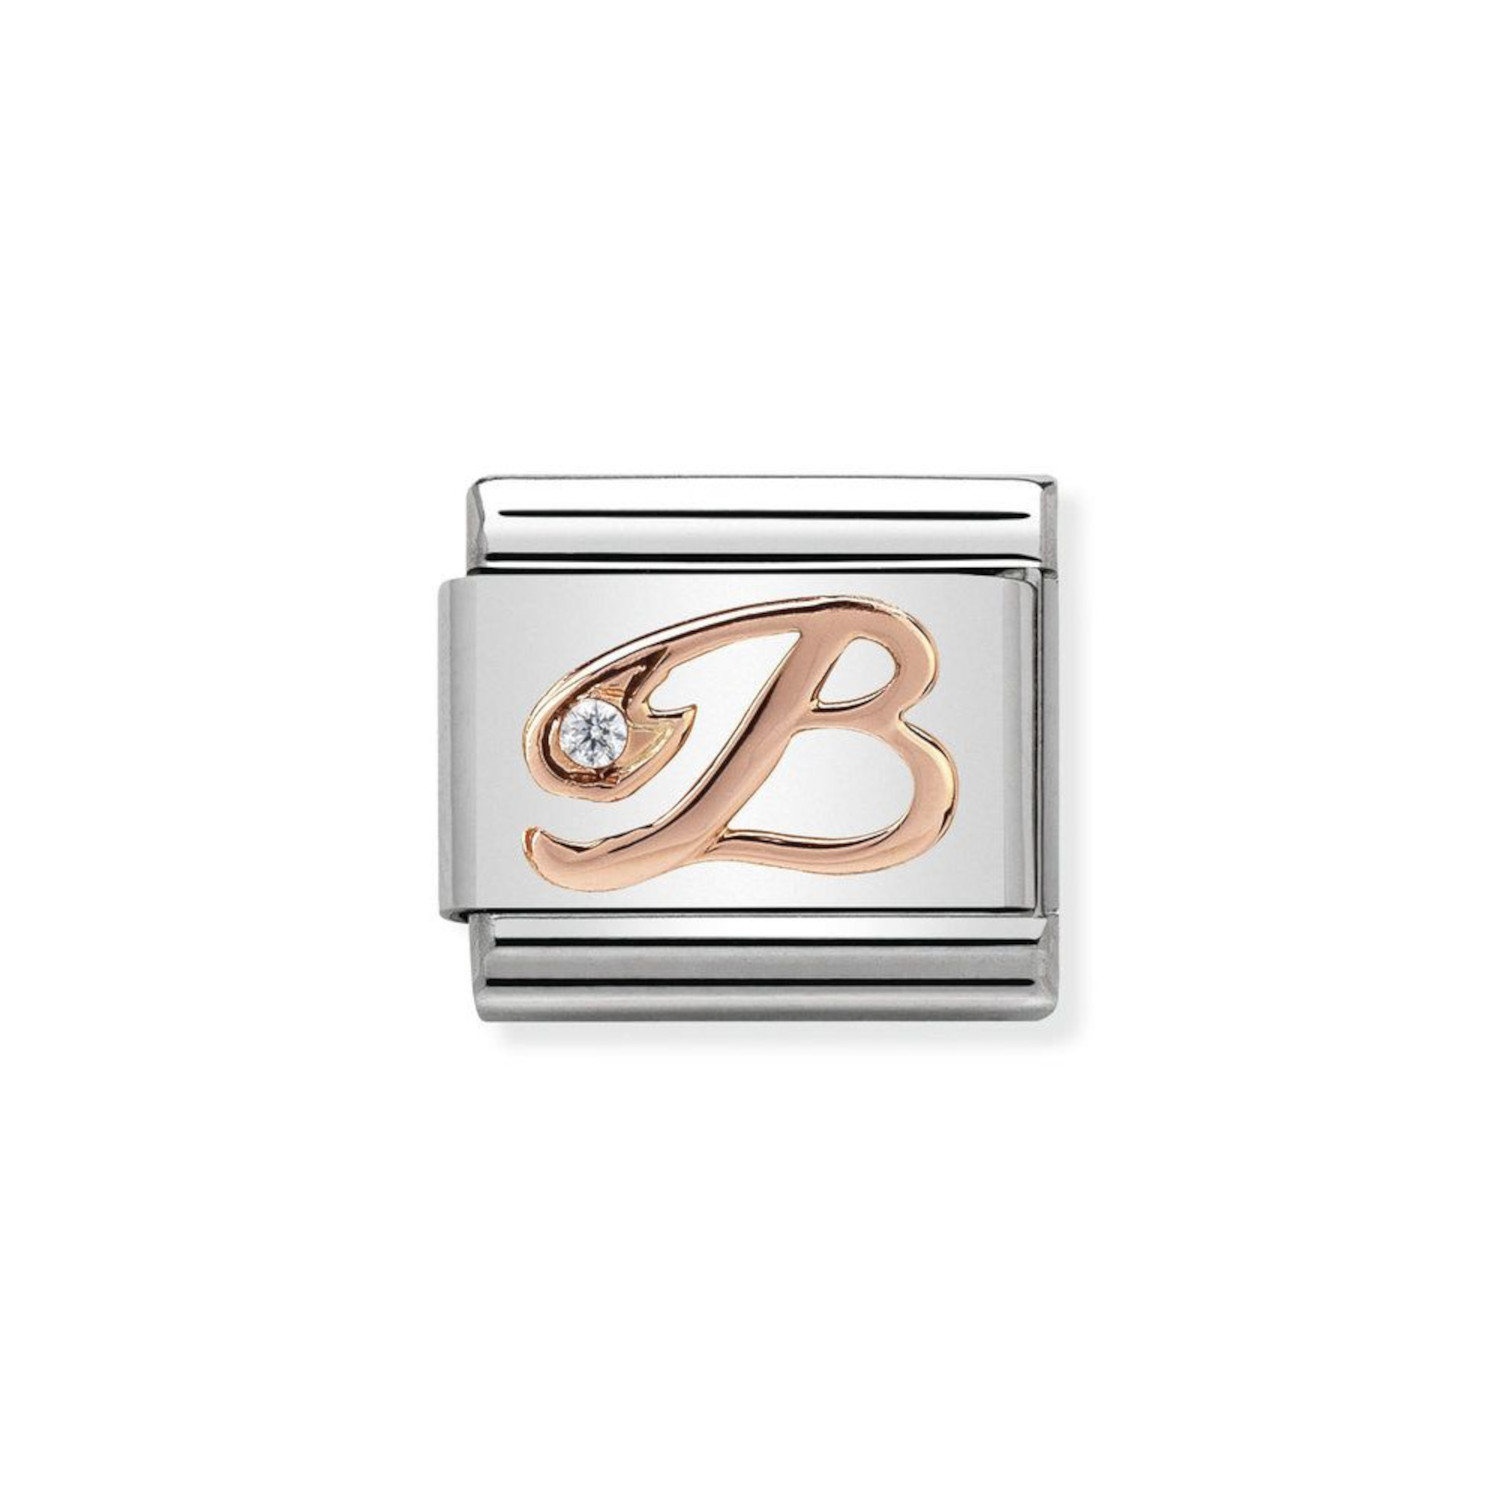 NOMINATION COMPOSABLE CLASSIC LINK LETTER B IN 9K ROSE GOLD 430310/02